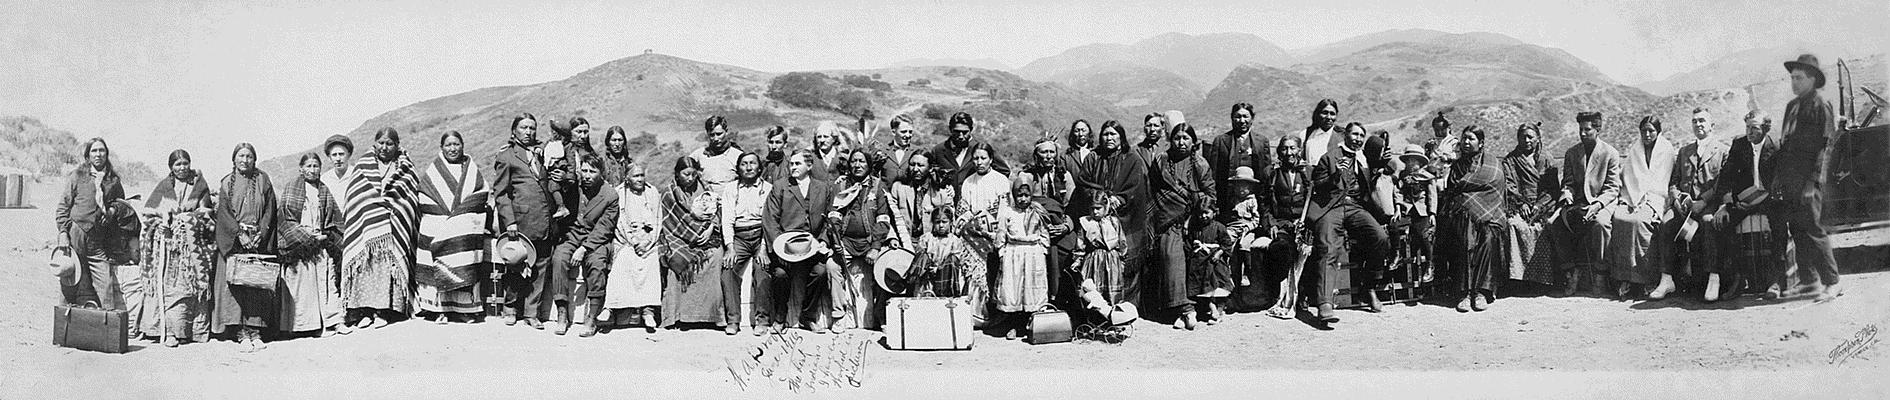 H. A. Brooks. June 1916. The Best Indians I have ever glorified in Pictures" at an unspecified site, presumably in California